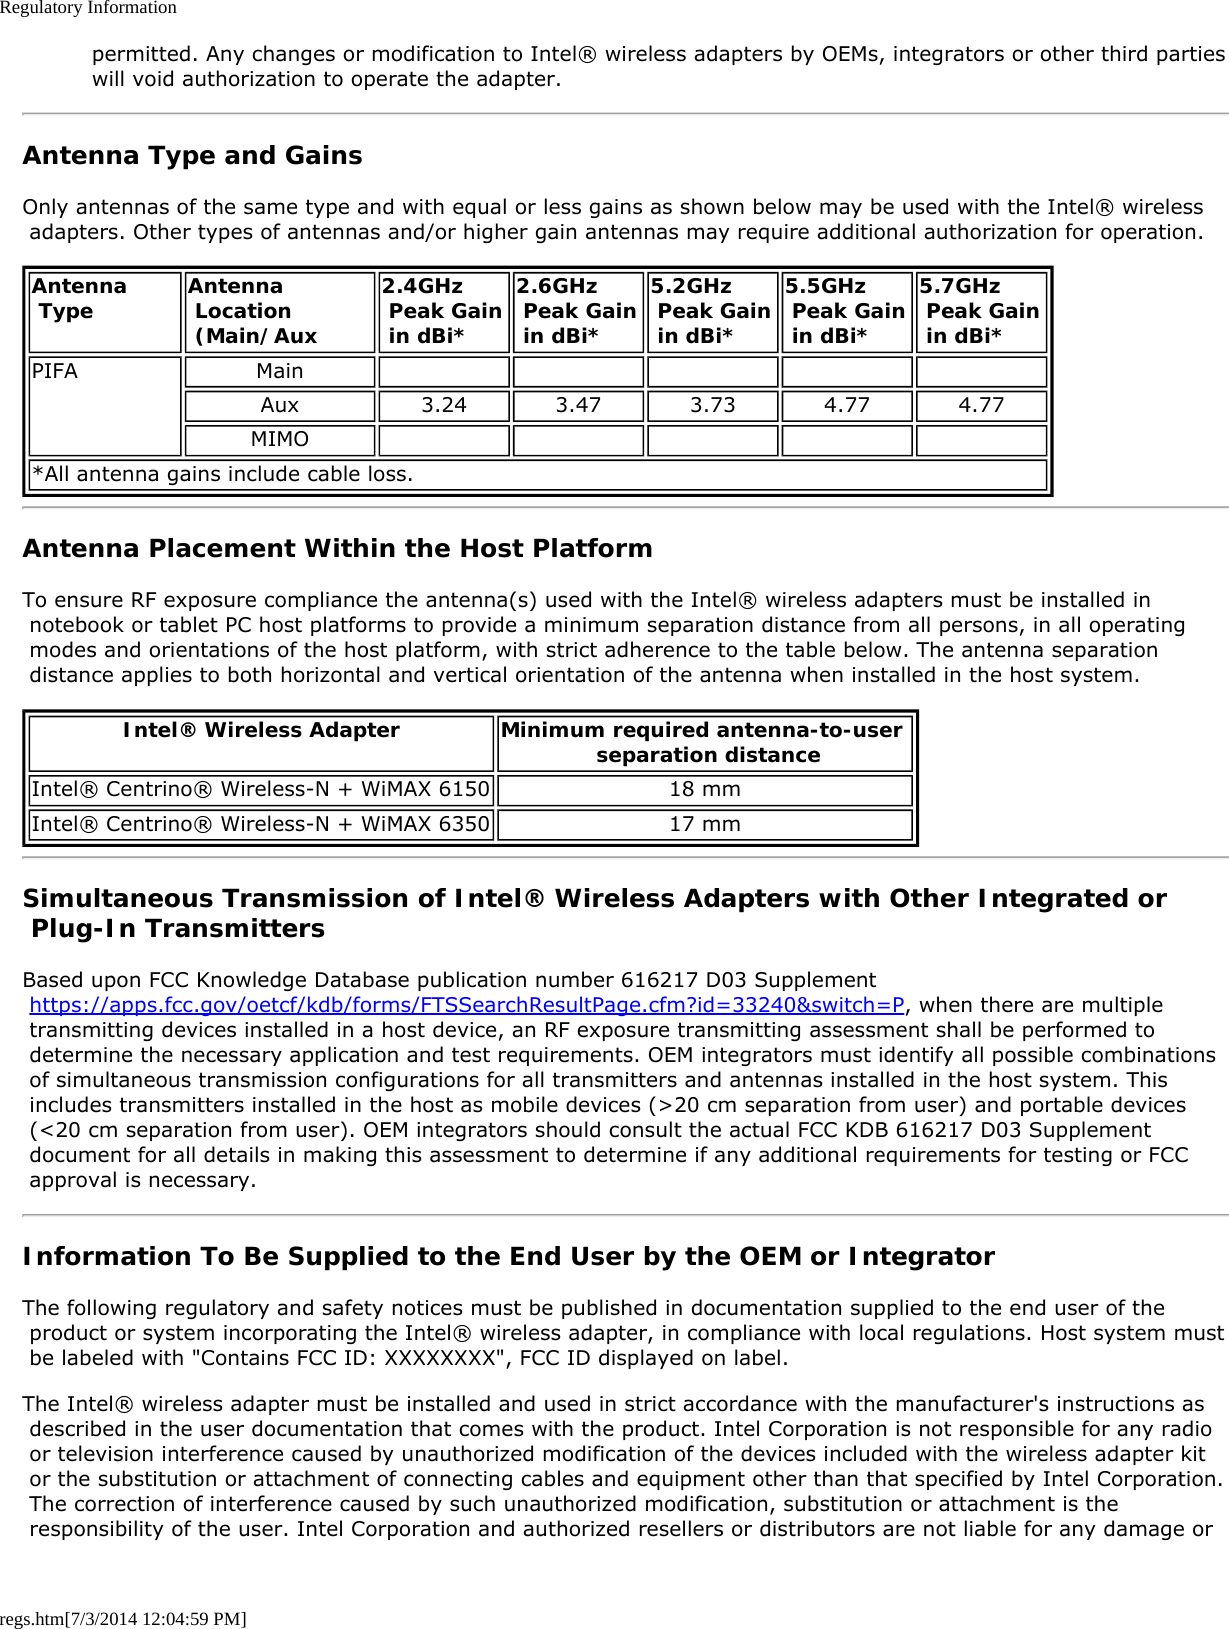 Regulatory Informationregs.htm[7/3/2014 12:04:59 PM] permitted. Any changes or modification to Intel® wireless adapters by OEMs, integrators or other third parties will void authorization to operate the adapter.Antenna Type and GainsOnly antennas of the same type and with equal or less gains as shown below may be used with the Intel® wireless adapters. Other types of antennas and/or higher gain antennas may require additional authorization for operation.Antenna Type Antenna Location (Main/Aux2.4GHz Peak Gain in dBi*2.6GHz Peak Gain in dBi*5.2GHz Peak Gain in dBi*5.5GHz Peak Gain in dBi*5.7GHz  Peak Gain in dBi*PIFA MainAux 3.24 3.47 3.73 4.77 4.77MIMO*All antenna gains include cable loss.Antenna Placement Within the Host PlatformTo ensure RF exposure compliance the antenna(s) used with the Intel® wireless adapters must be installed in notebook or tablet PC host platforms to provide a minimum separation distance from all persons, in all operating modes and orientations of the host platform, with strict adherence to the table below. The antenna separation distance applies to both horizontal and vertical orientation of the antenna when installed in the host system.Intel® Wireless Adapter Minimum required antenna-to-user  separation distanceIntel® Centrino® Wireless-N + WiMAX 6150 18 mmIntel® Centrino® Wireless-N + WiMAX 6350 17 mmSimultaneous Transmission of Intel® Wireless Adapters with Other Integrated or Plug-In TransmittersBased upon FCC Knowledge Database publication number 616217 D03 Supplement https://apps.fcc.gov/oetcf/kdb/forms/FTSSearchResultPage.cfm?id=33240&amp;switch=P, when there are multiple transmitting devices installed in a host device, an RF exposure transmitting assessment shall be performed to determine the necessary application and test requirements. OEM integrators must identify all possible combinations of simultaneous transmission configurations for all transmitters and antennas installed in the host system. This includes transmitters installed in the host as mobile devices (&gt;20 cm separation from user) and portable devices (&lt;20 cm separation from user). OEM integrators should consult the actual FCC KDB 616217 D03 Supplement document for all details in making this assessment to determine if any additional requirements for testing or FCC approval is necessary.Information To Be Supplied to the End User by the OEM or IntegratorThe following regulatory and safety notices must be published in documentation supplied to the end user of the product or system incorporating the Intel® wireless adapter, in compliance with local regulations. Host system must be labeled with &quot;Contains FCC ID: XXXXXXXX&quot;, FCC ID displayed on label.The Intel® wireless adapter must be installed and used in strict accordance with the manufacturer&apos;s instructions as described in the user documentation that comes with the product. Intel Corporation is not responsible for any radio or television interference caused by unauthorized modification of the devices included with the wireless adapter kit or the substitution or attachment of connecting cables and equipment other than that specified by Intel Corporation. The correction of interference caused by such unauthorized modification, substitution or attachment is the responsibility of the user. Intel Corporation and authorized resellers or distributors are not liable for any damage or